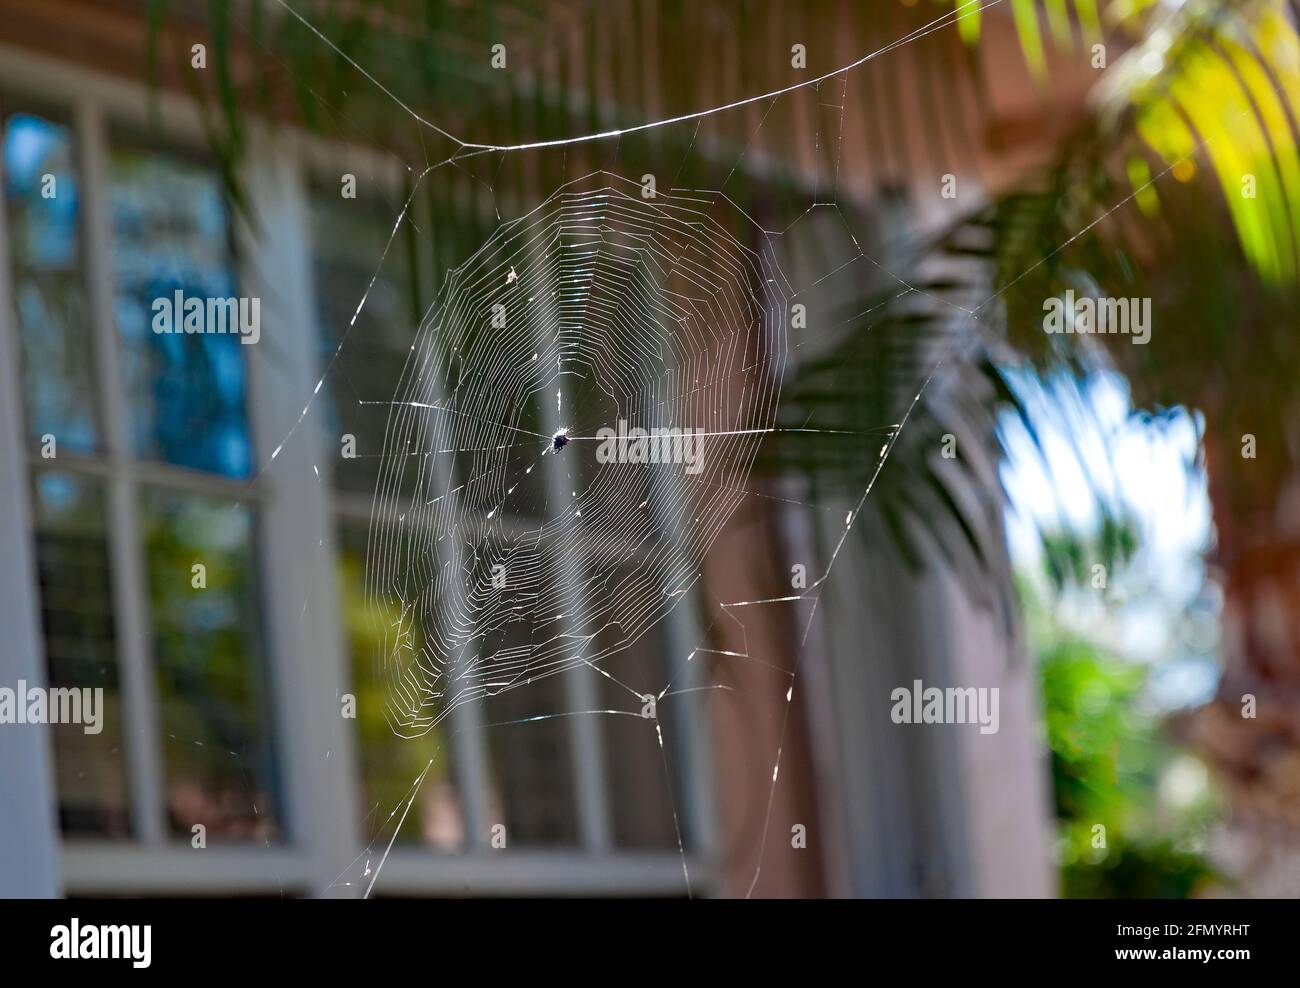 Spider web outside the window of a house. Stock Photo